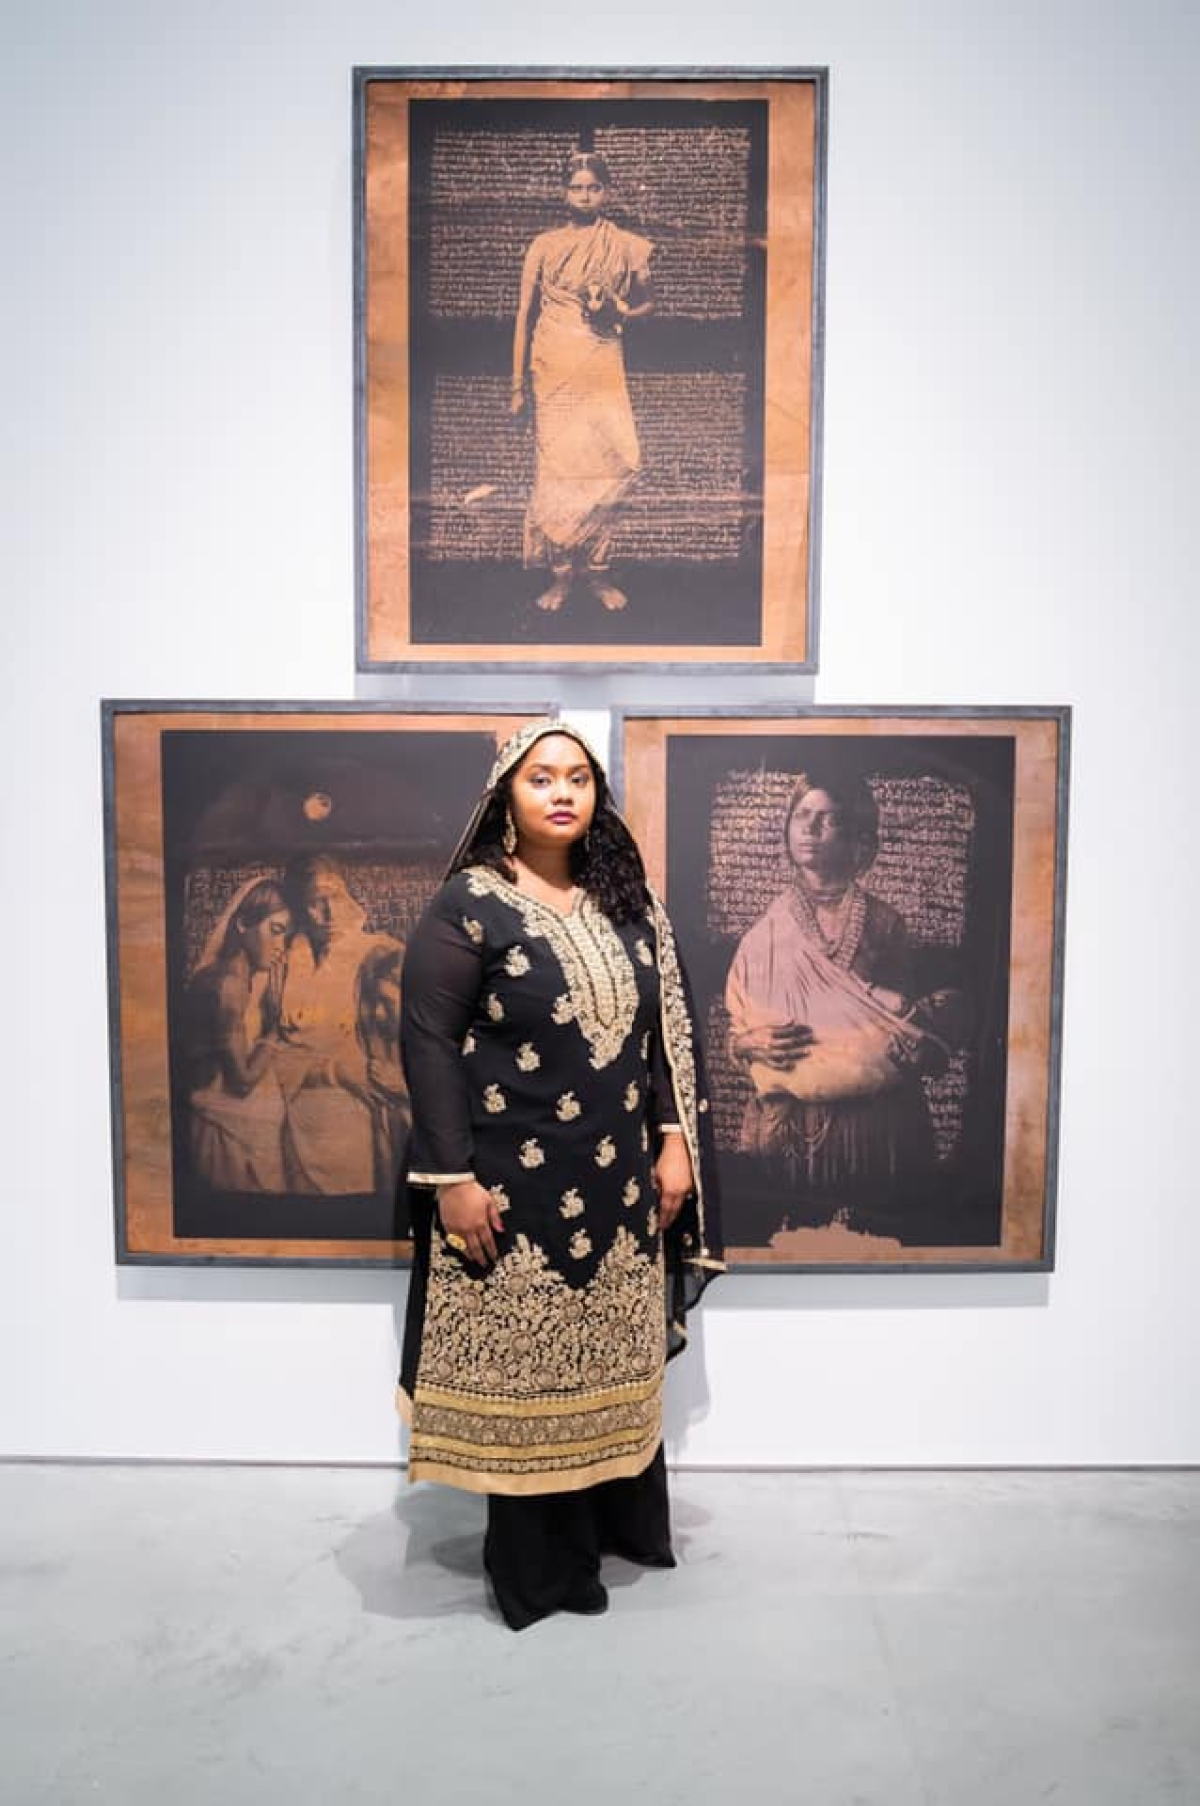 A woman in an intricate embroidered outfit and a head covering stands in front of three images of Indian women.